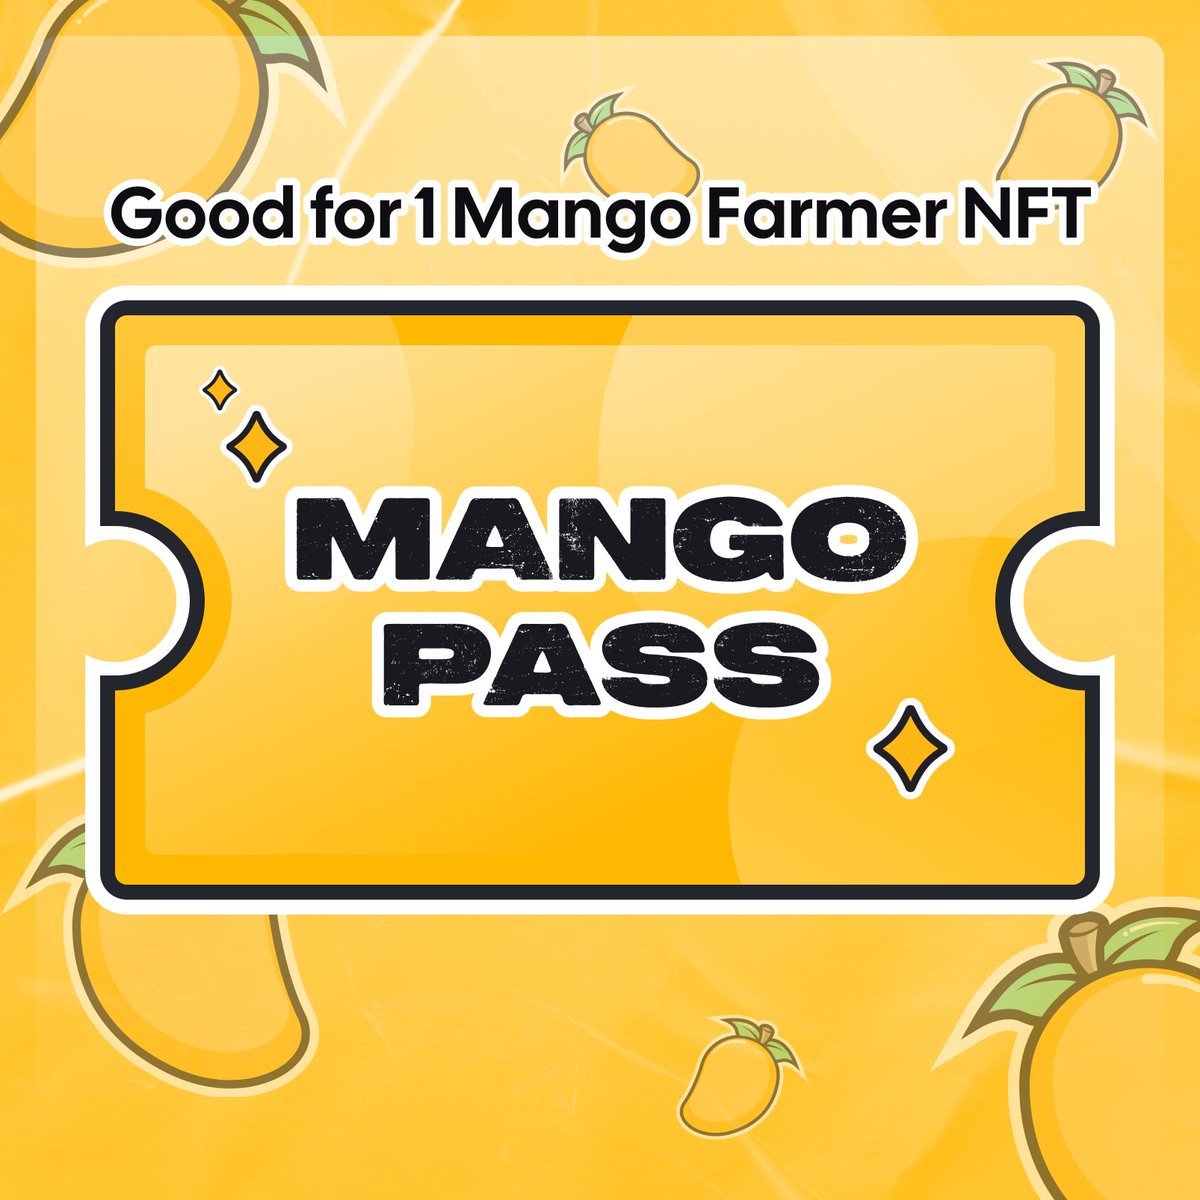 📢 Attention PolyMango NFT holders! The PolyMango burn contract is now live. 🔥

Each PolyMango NFT burn has a 20% chance of obtaining a #MANGOPASS. This pass grants you access to participate in the future Mango Farmer NFT presale!

 Start burning now 🔥👇
mangofarmers.club